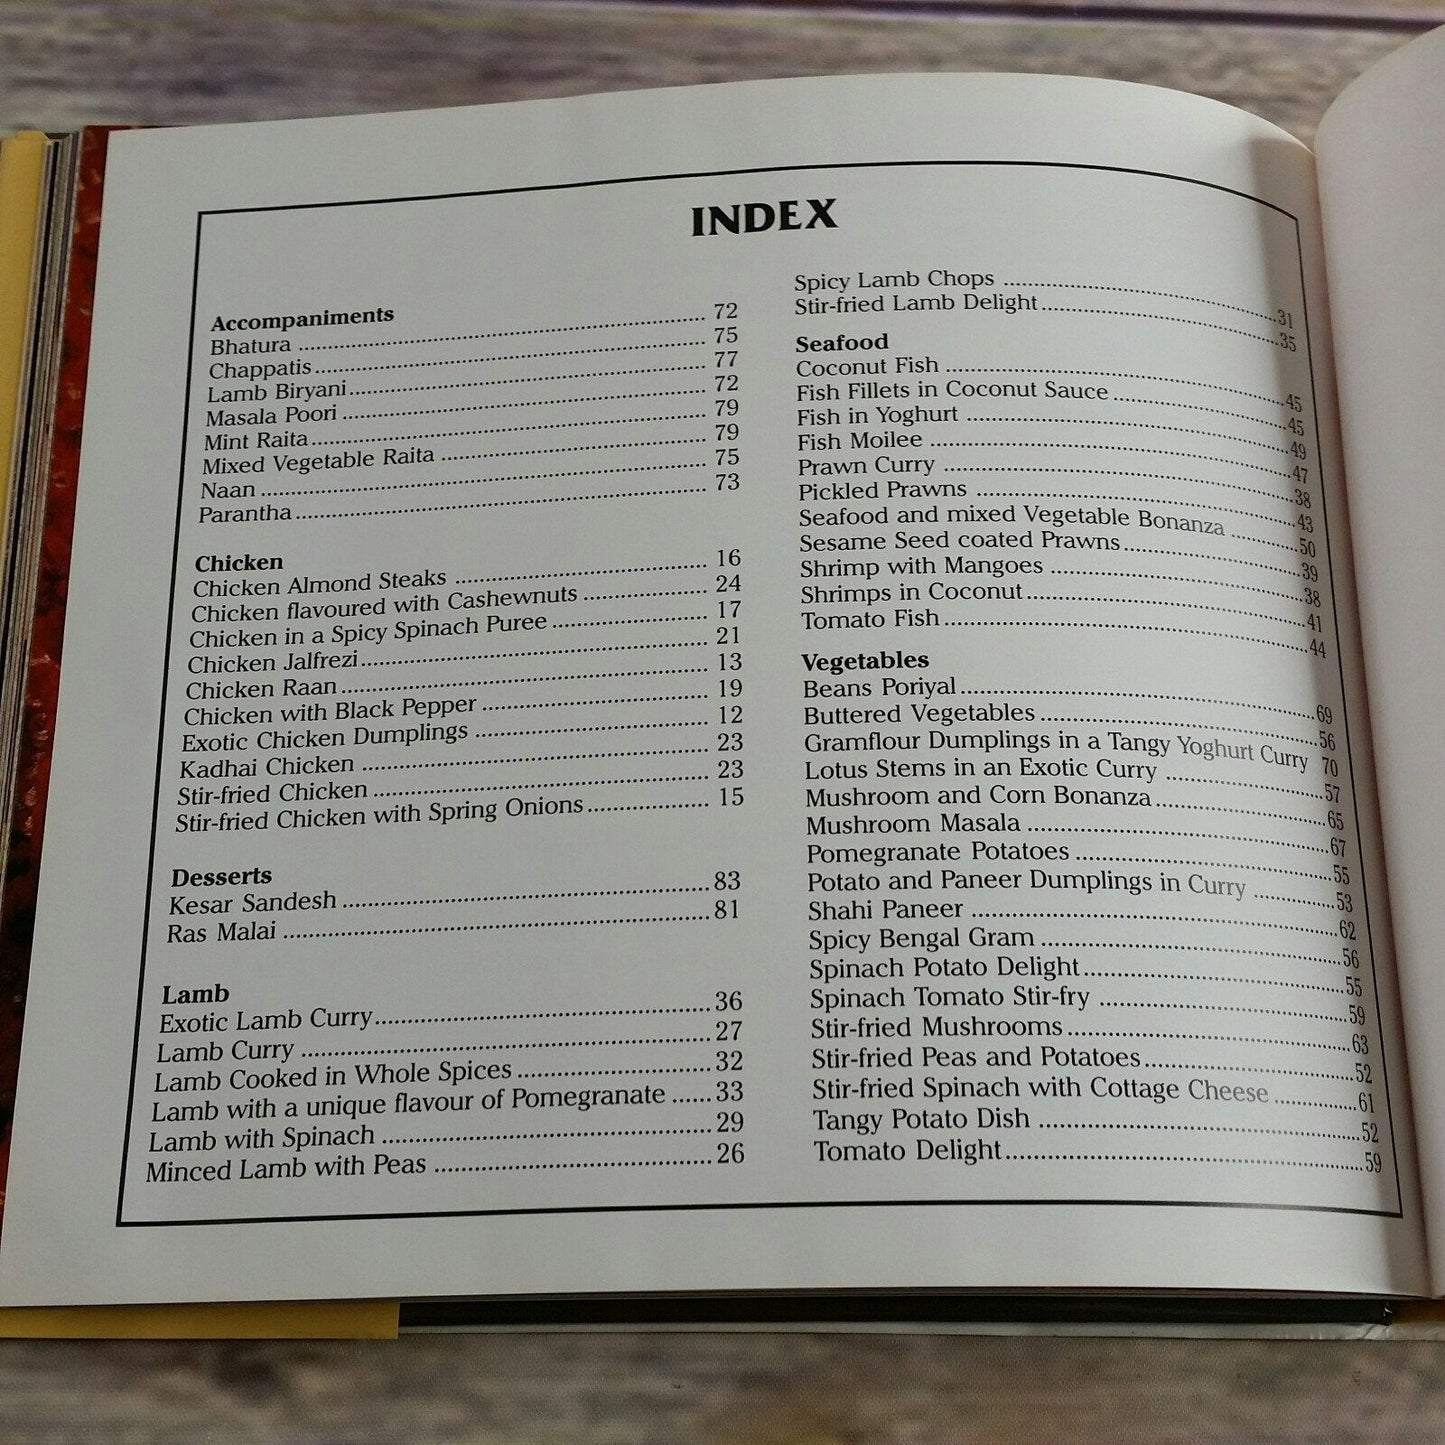 Vtg Indian Cookbook Recipes Indian Cuisine Balti 1996 Hardcover with Dust Jacket Indian Food Recipes Lustre Press